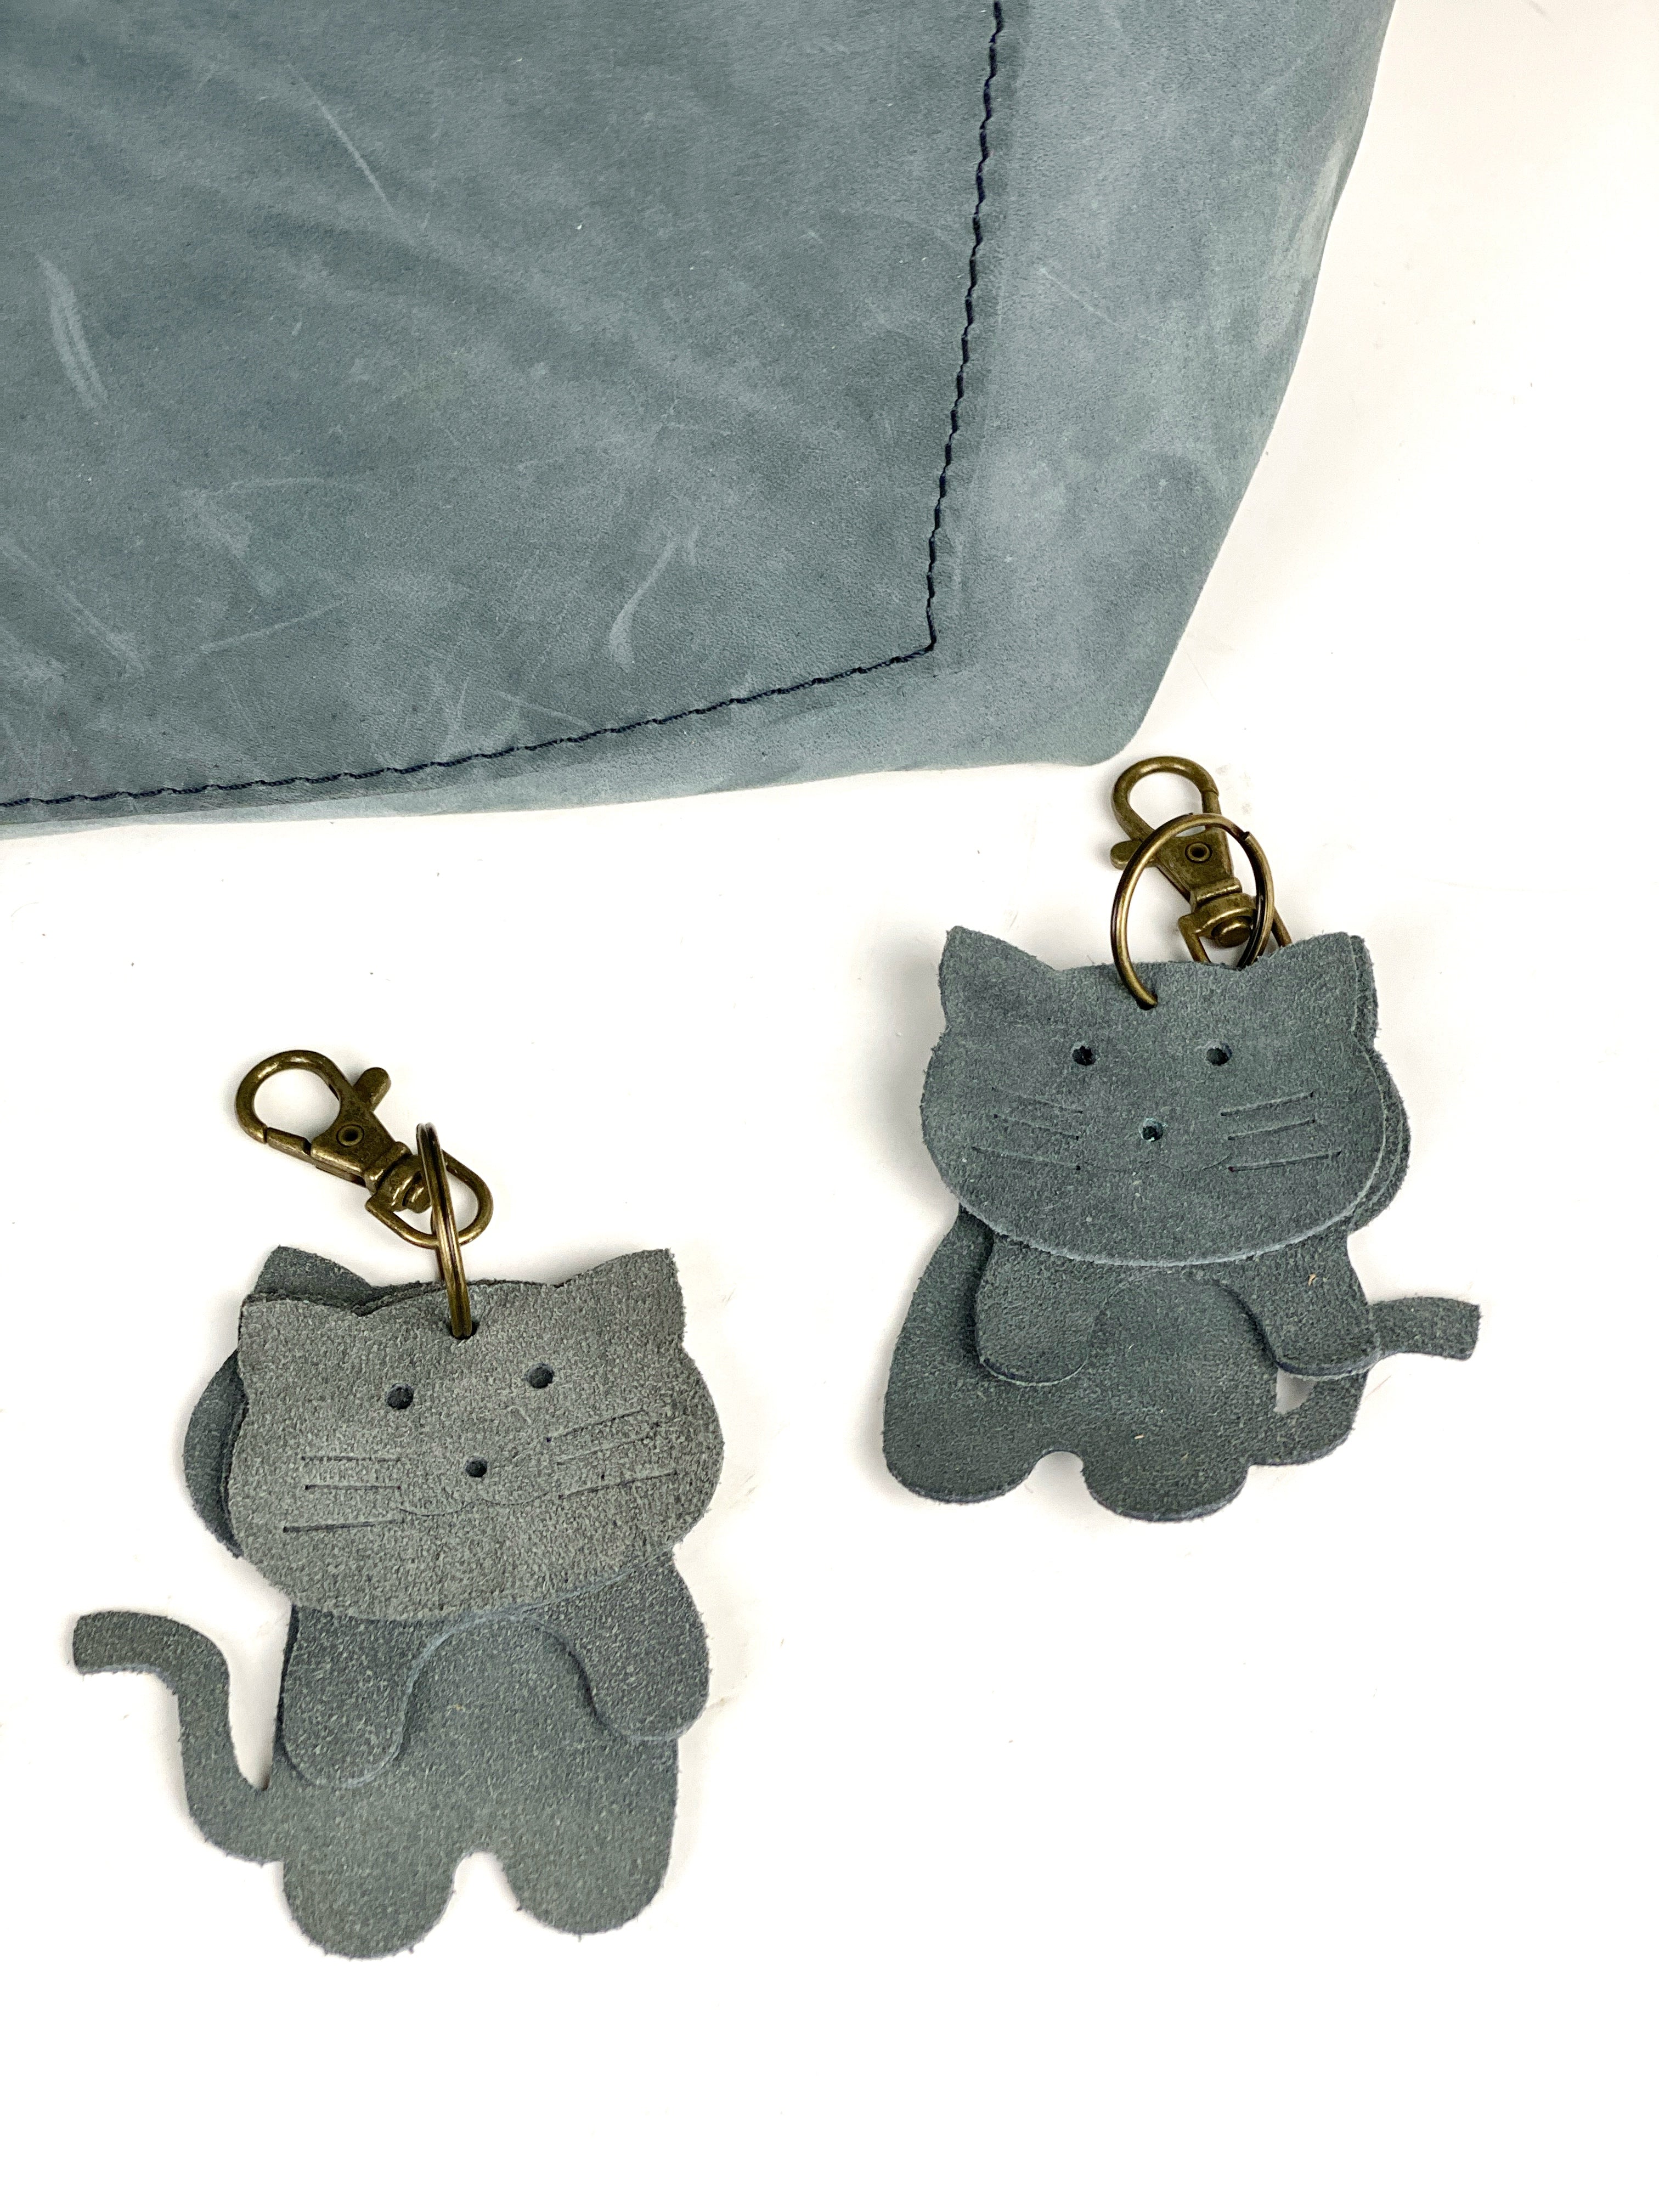 Suede Cat Keyring Purse Charm, Bag Clip on Cat Fob, Cute Cat Lovers Accessory